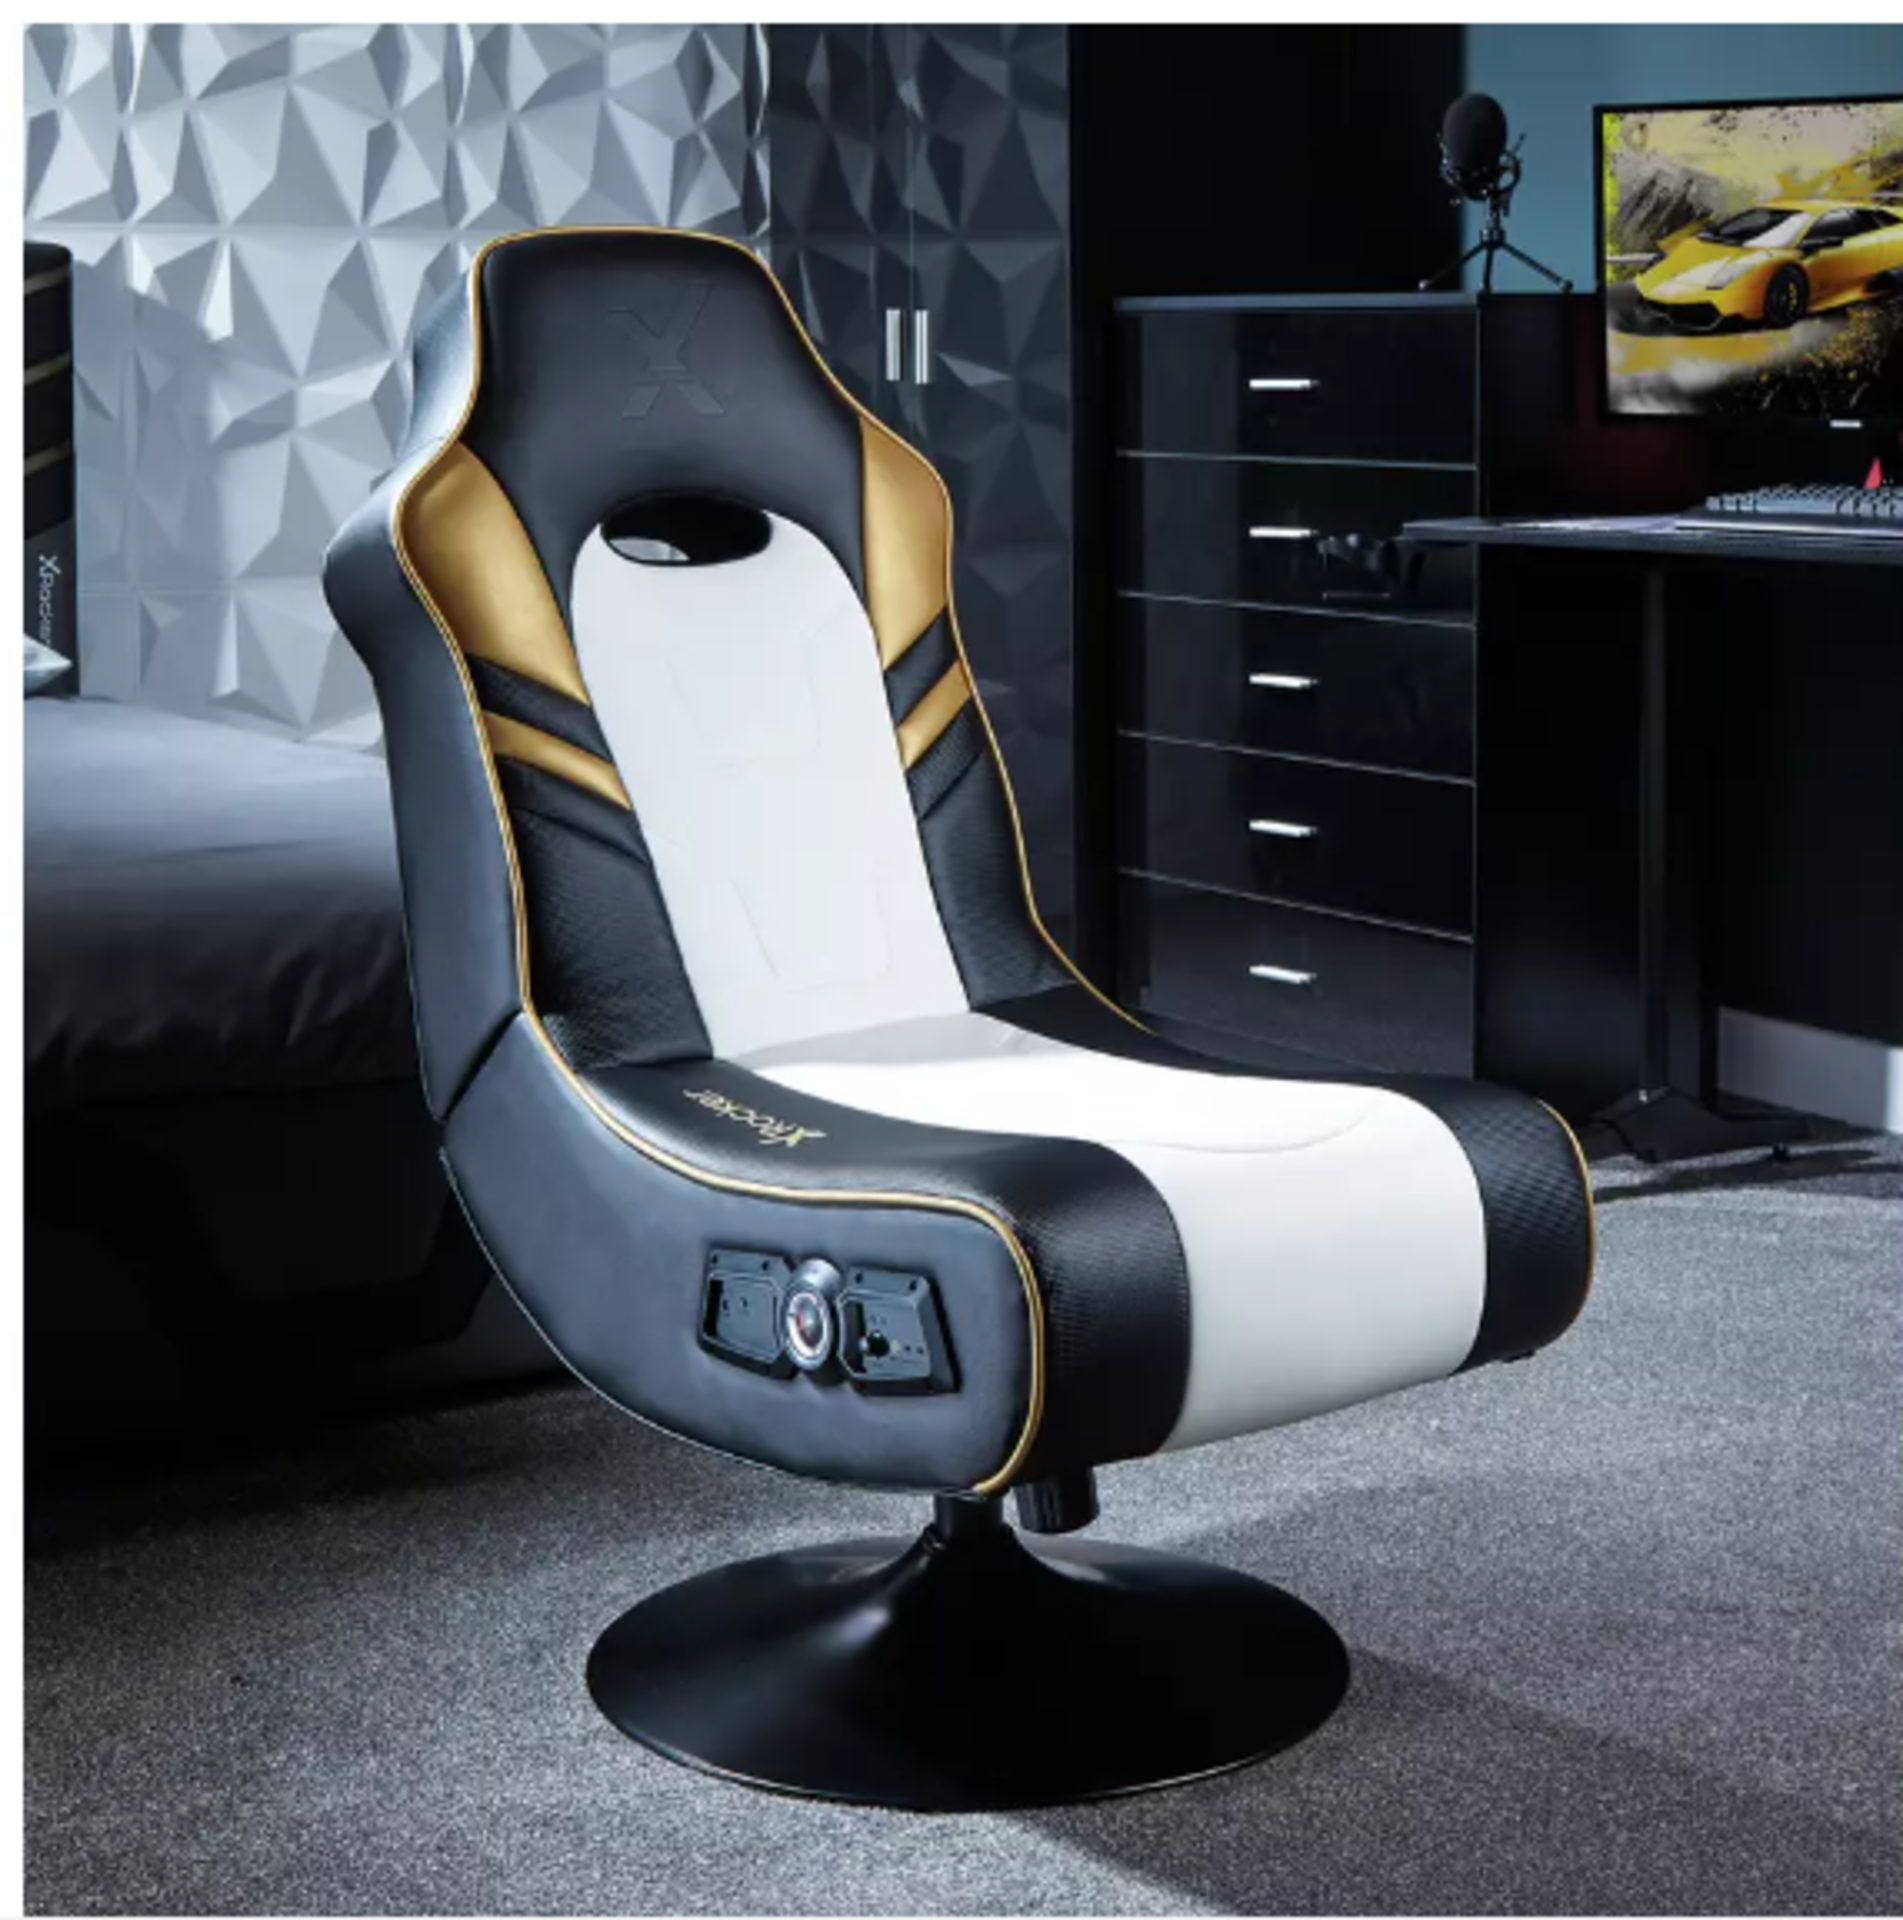 X Rocker eSports Pro 2.1 Audio Gaming Chair. RRP £169.00. o for gold with the X Rocker eSports Pro - Image 2 of 2